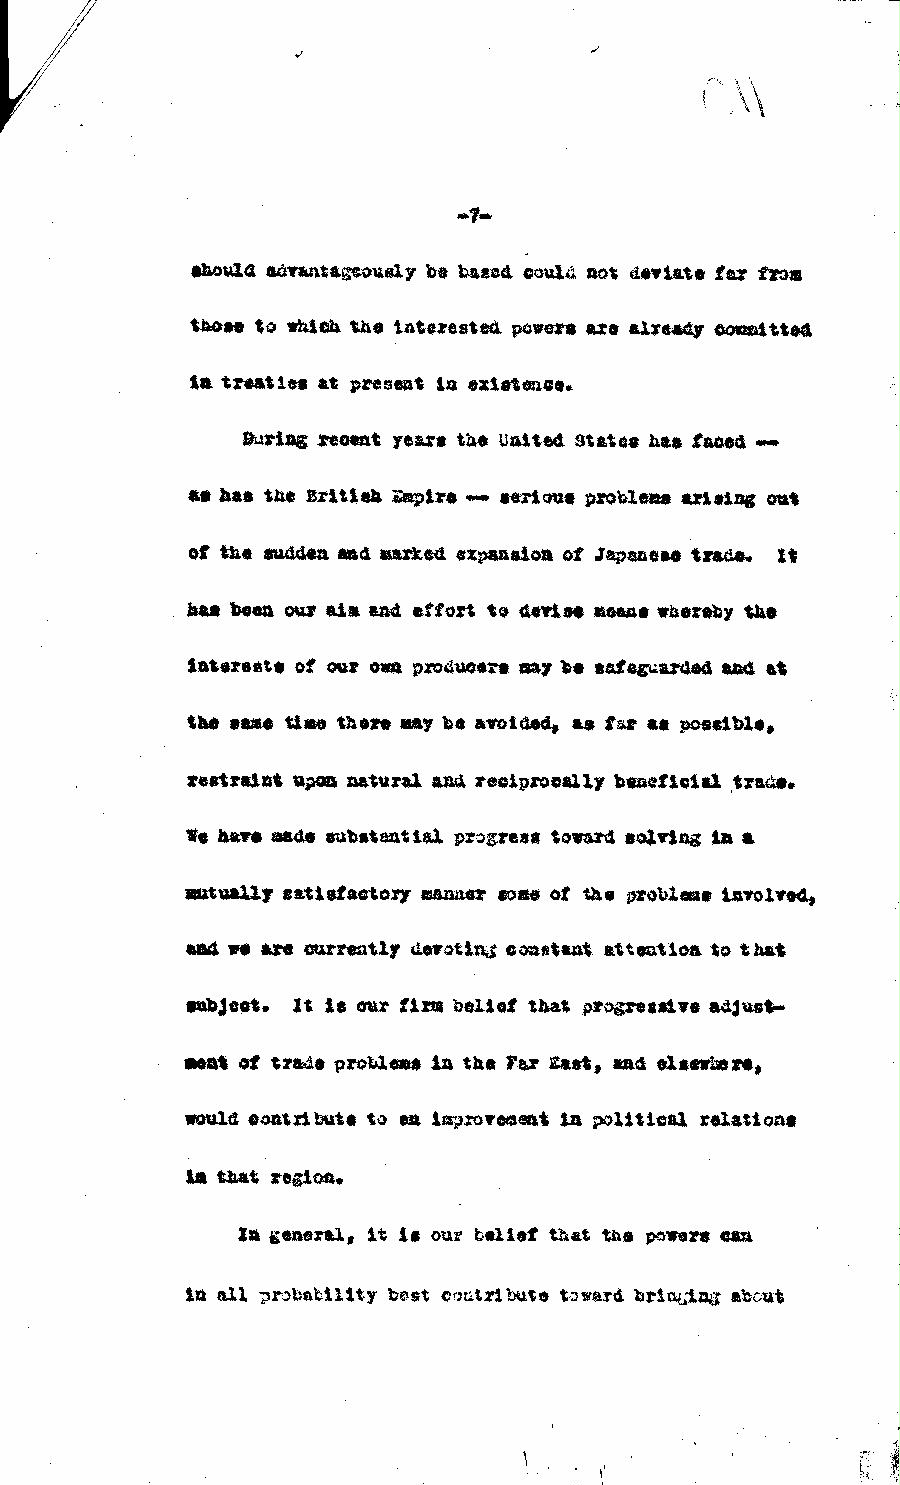 [a303c11.jpg] - Cont-memo from Dept. of State5/28/37